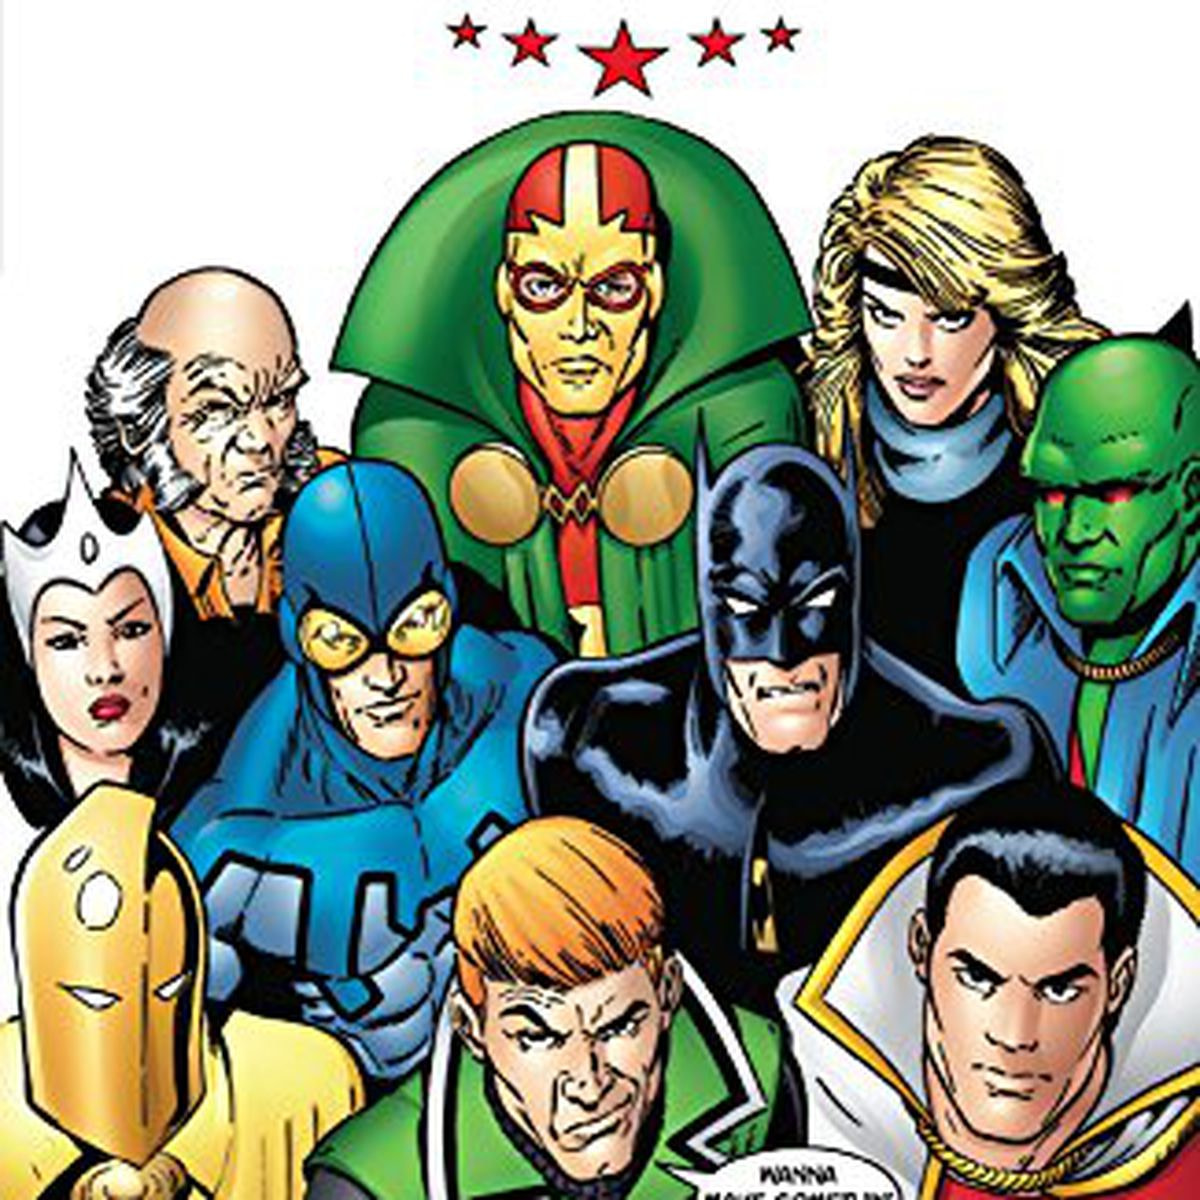 Cover of Justice League International Vol. 1